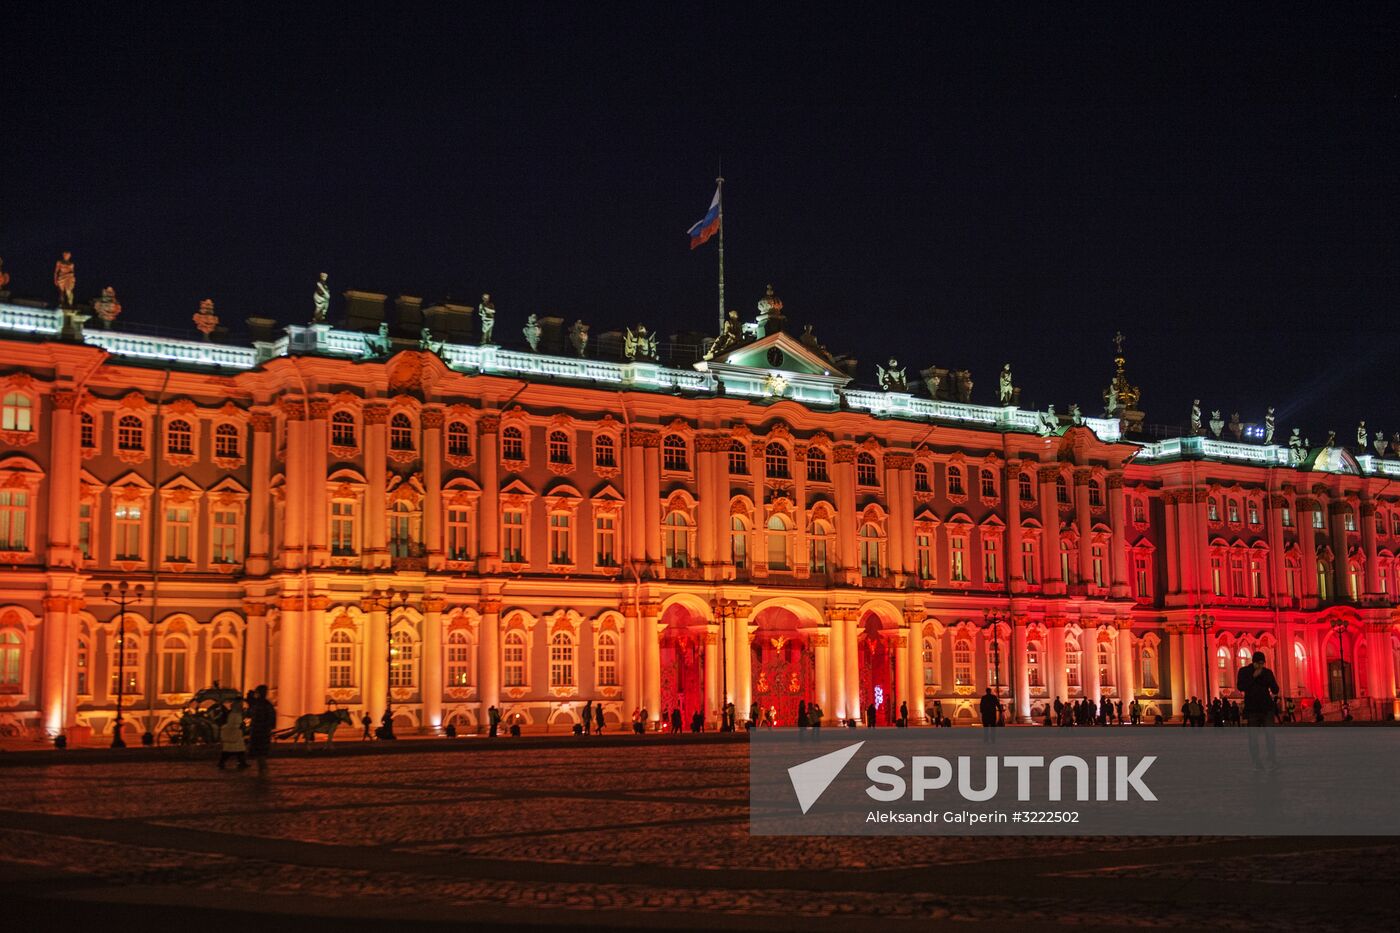 Storming of Winter Palace light show in St. Petersburg